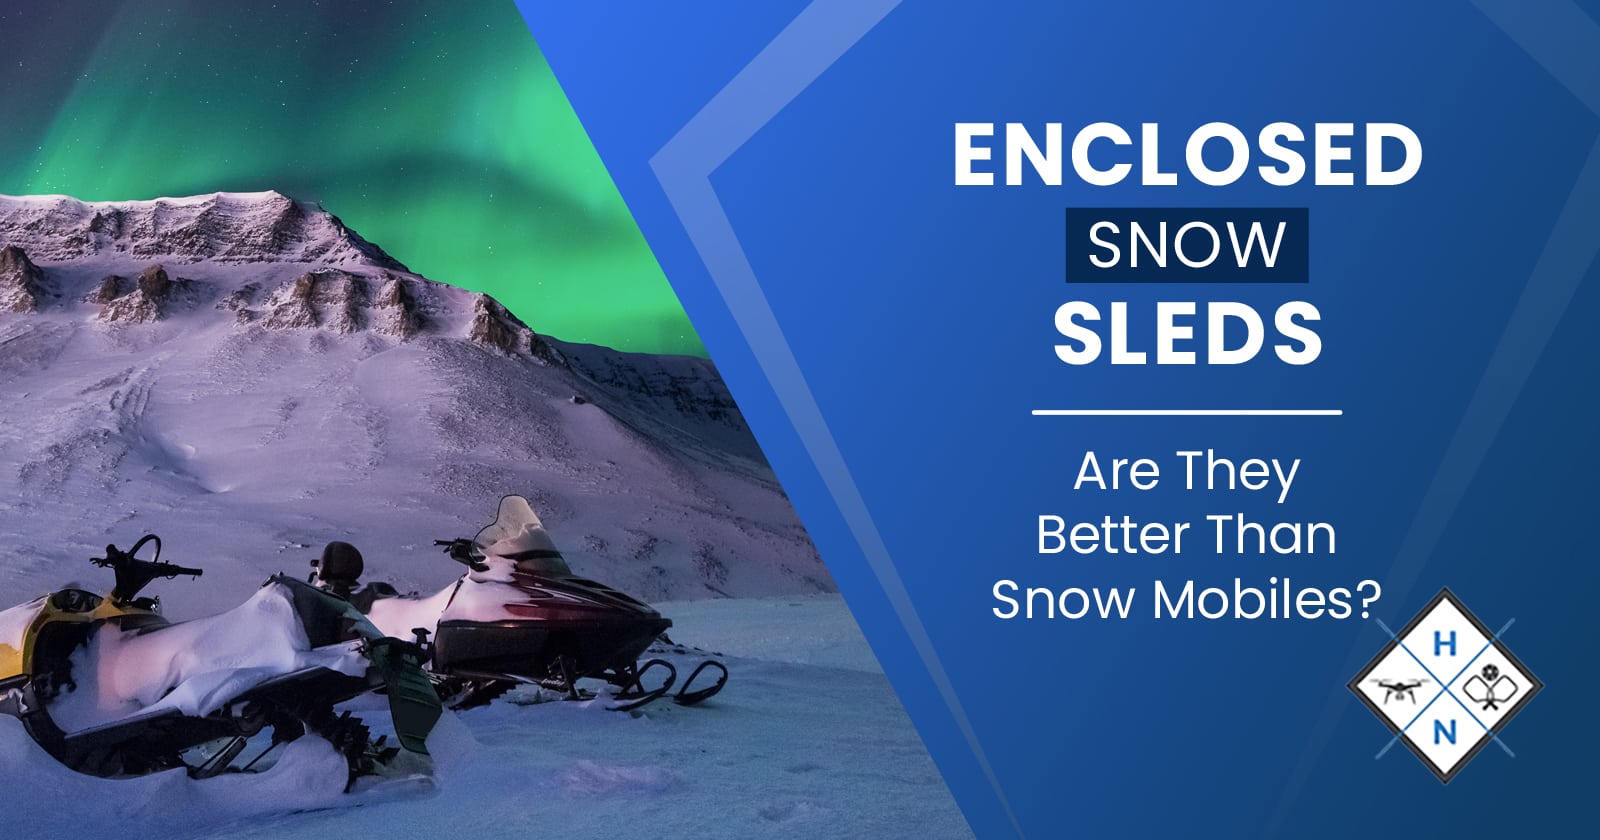 Enclosed Snow Sleds – Are They Better Than Snow Mobiles?